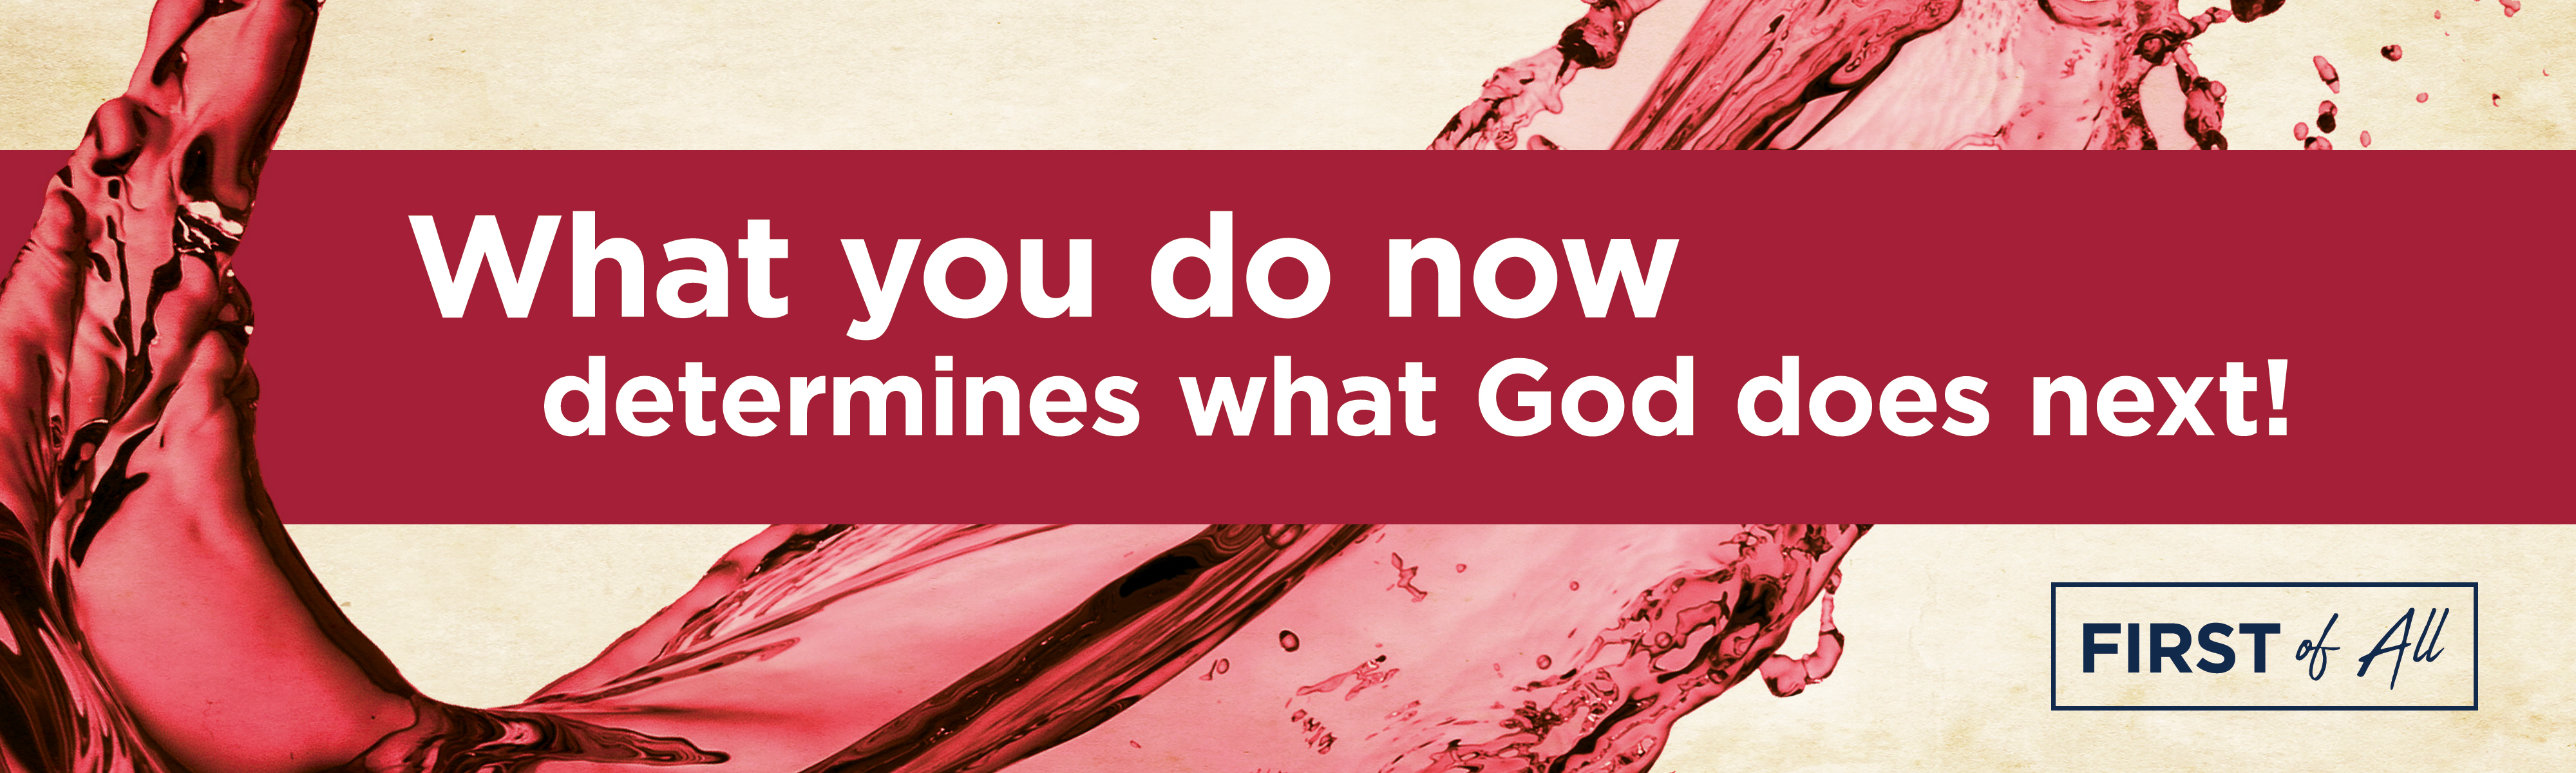 What you do NOW determines what God does next! First of All.